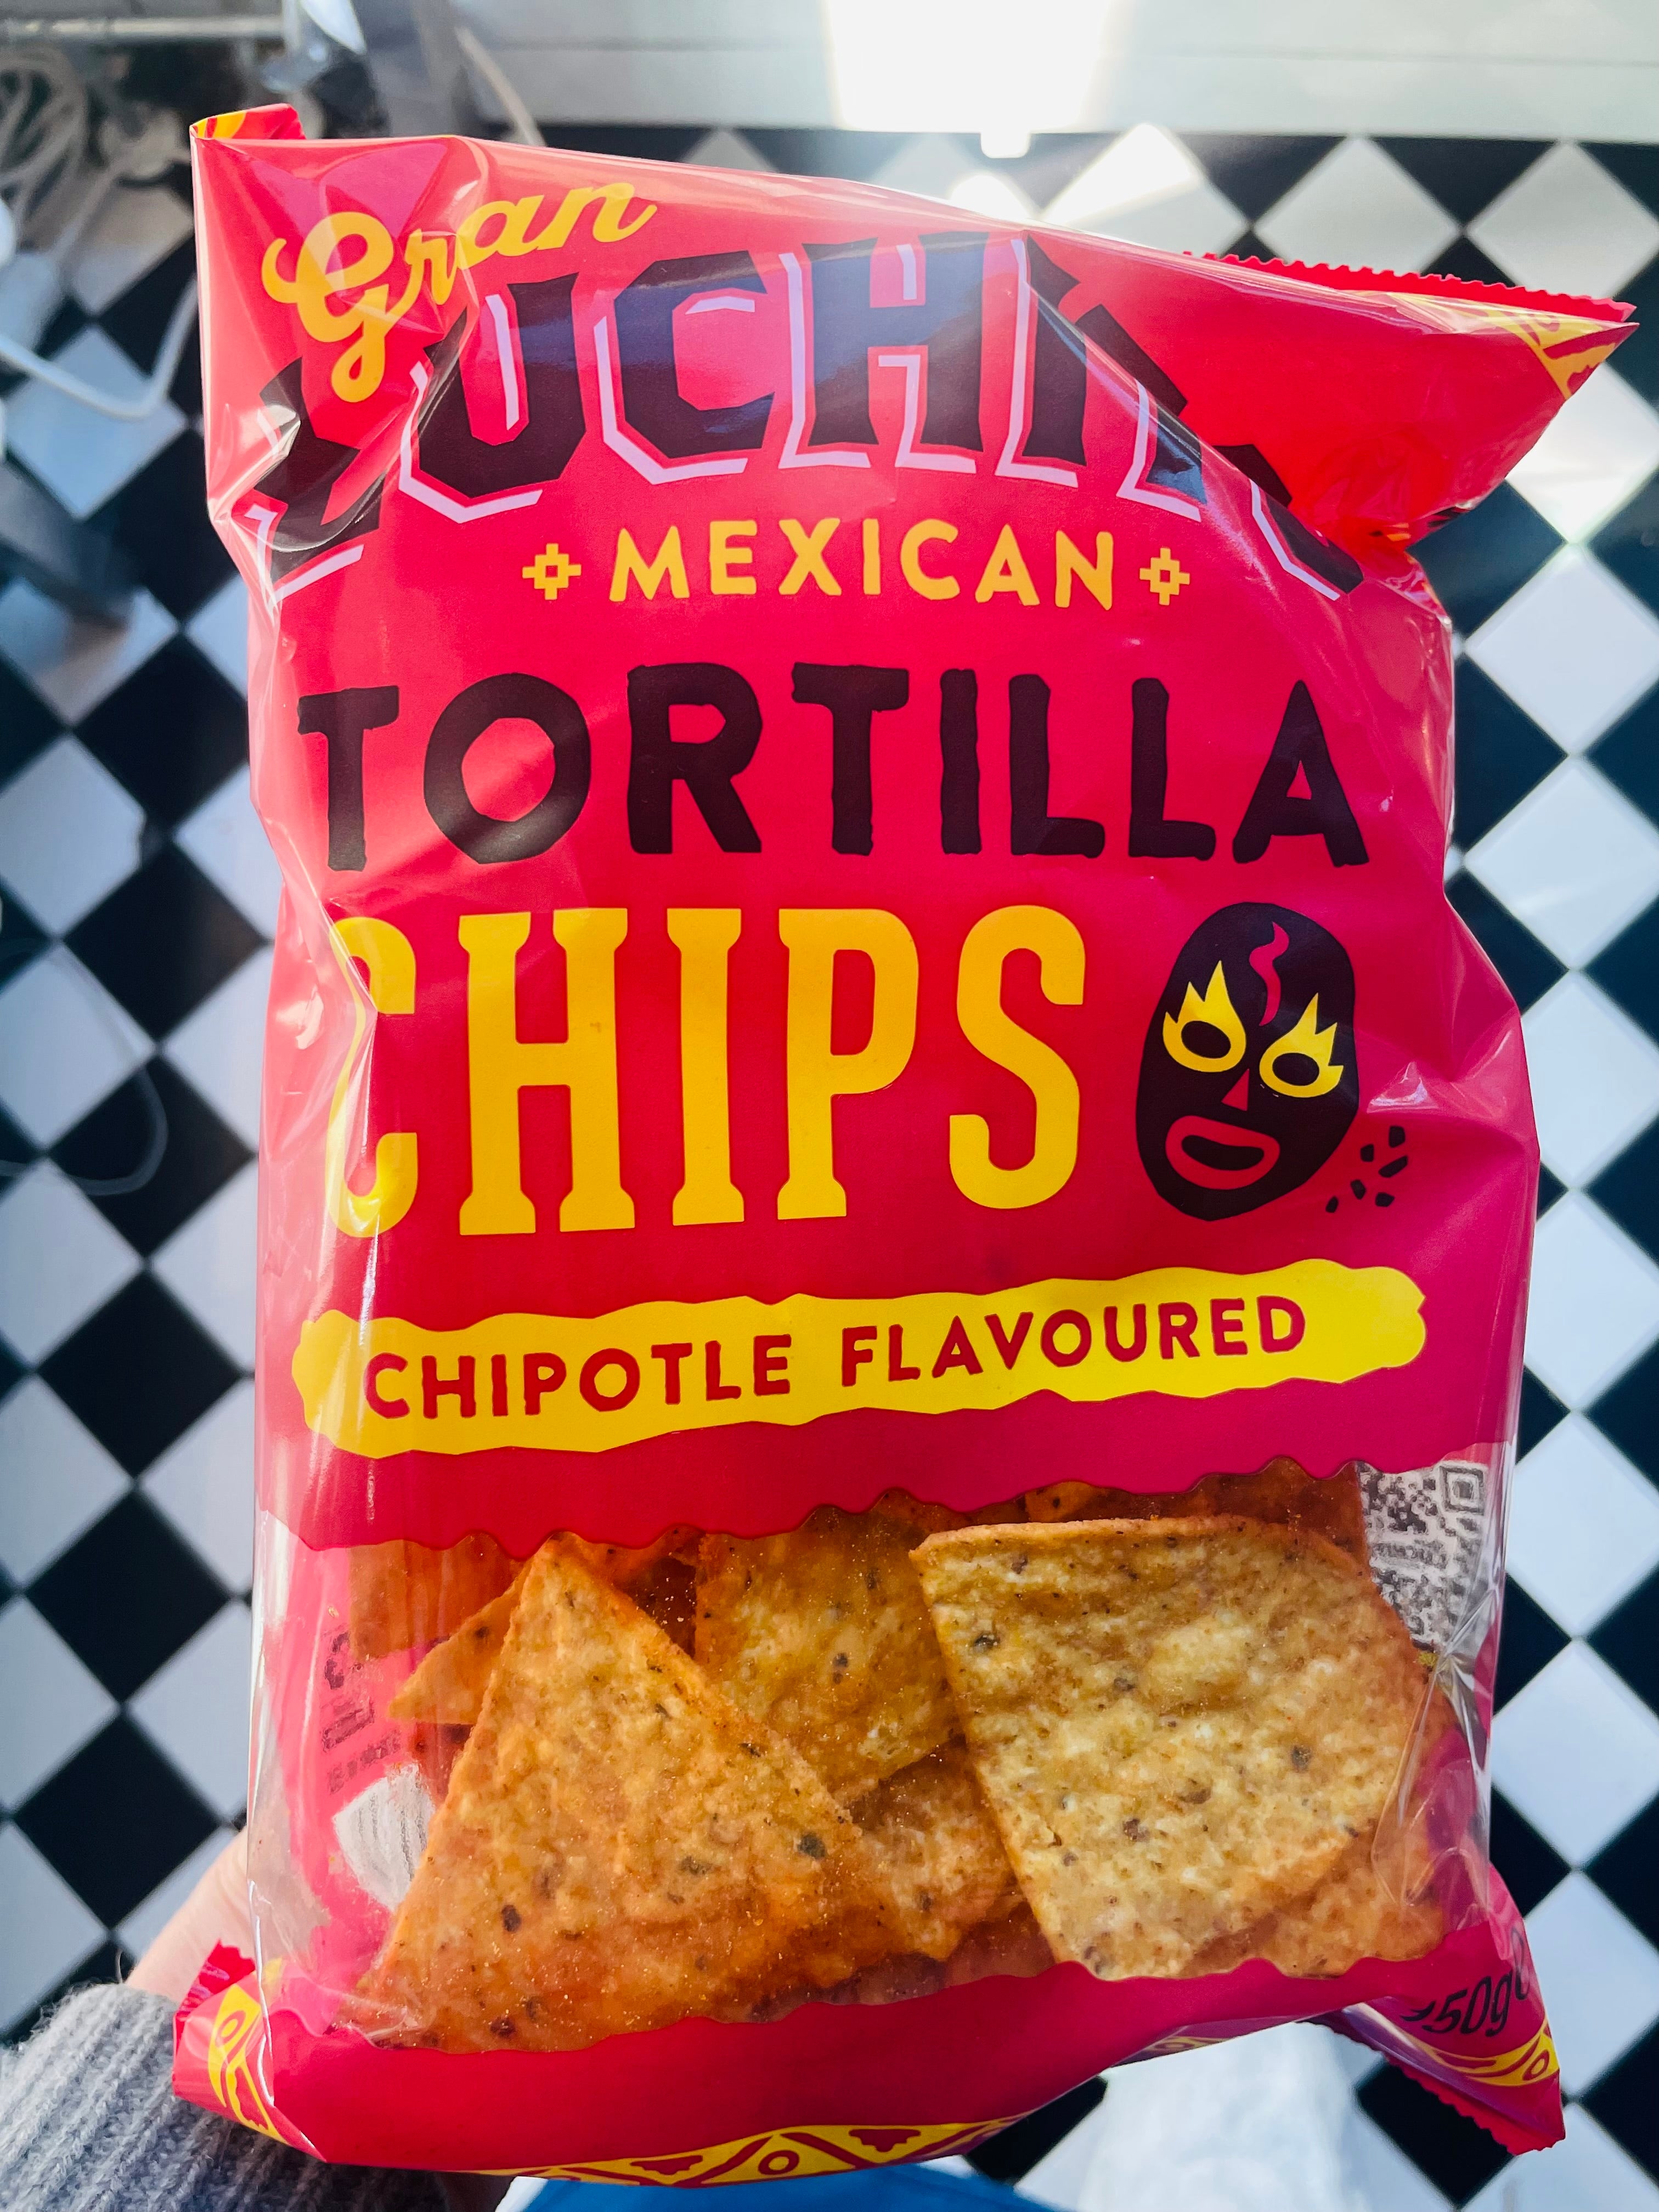 Luchito tortillachips, chipotle